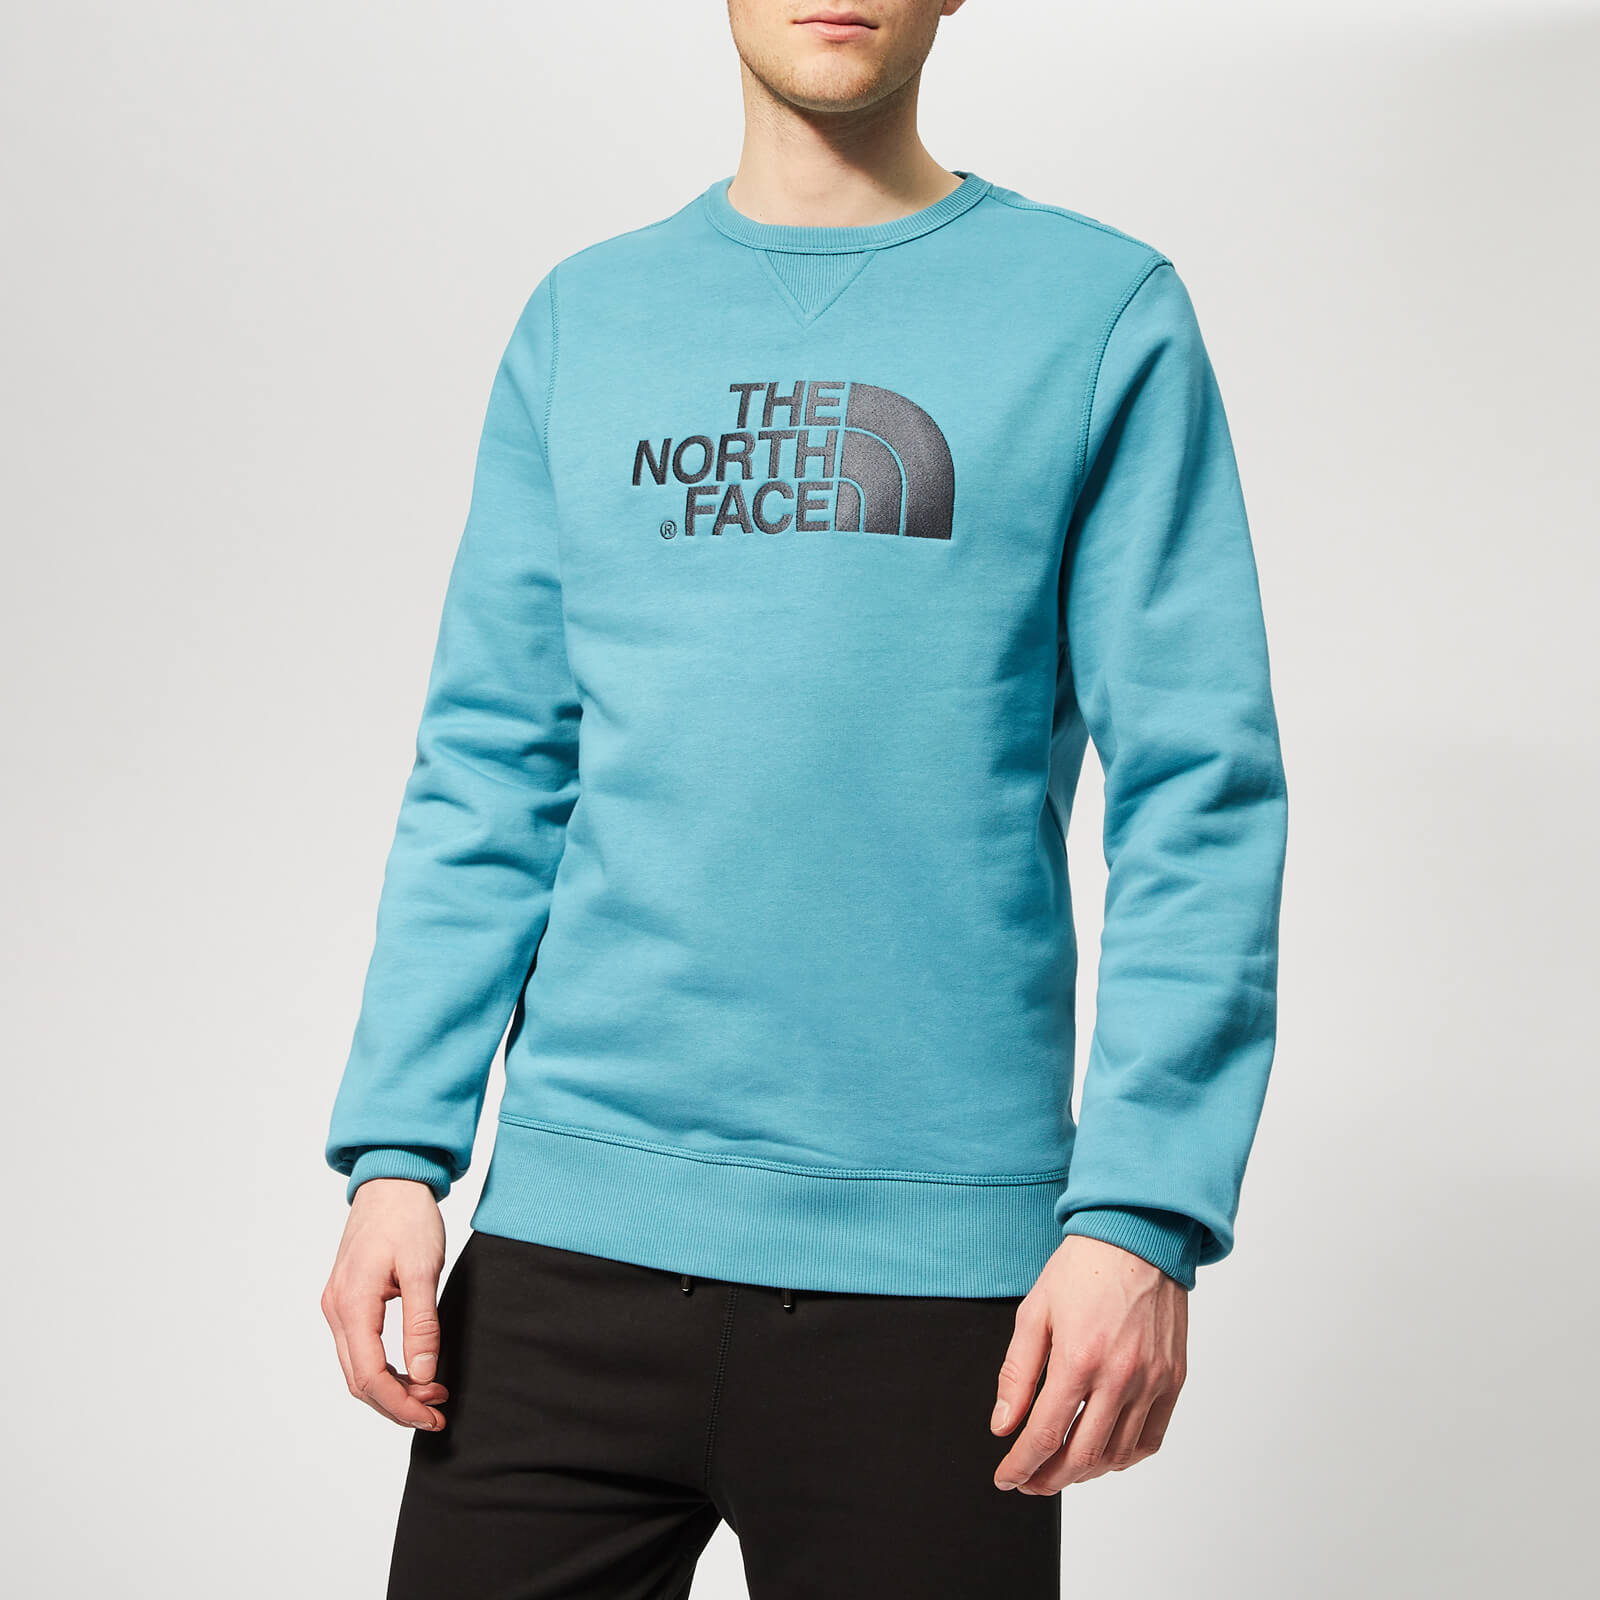 Mens North Face Crewneck Sweatshirt Online Hotsell, UP TO 65% OFF 